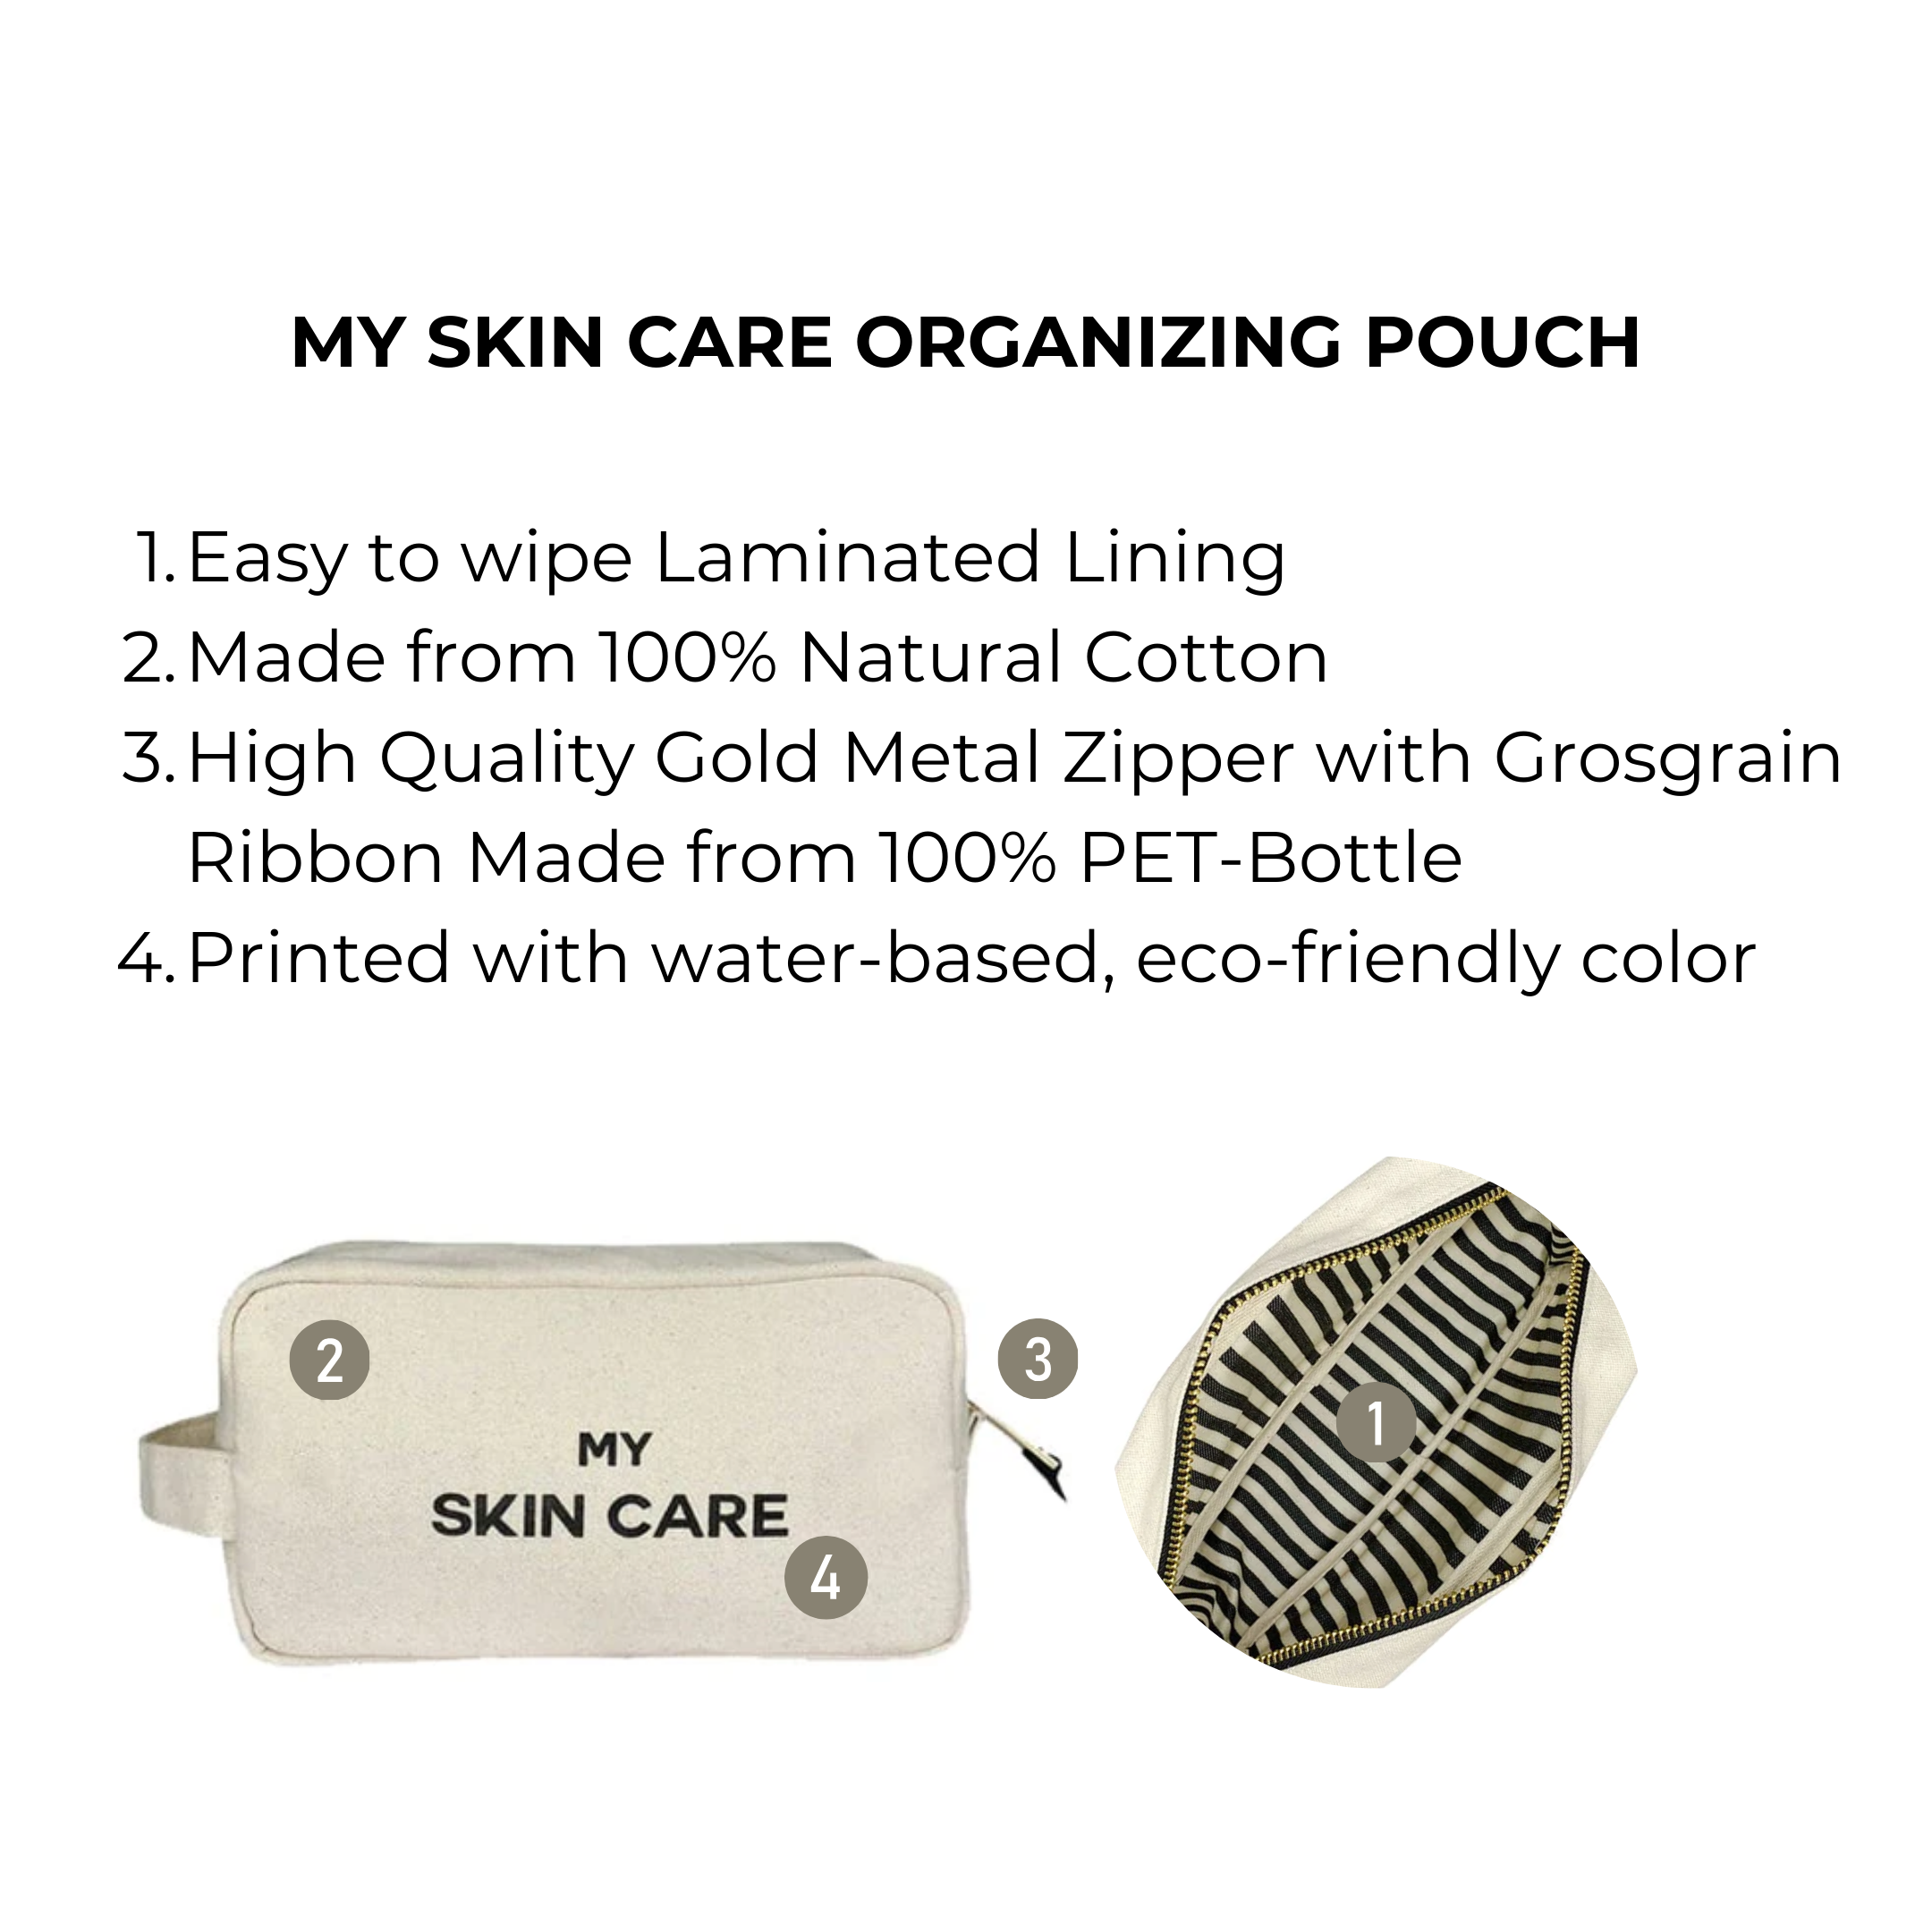 My Skin Care - Organizing Pouch, Cream | Bag-all